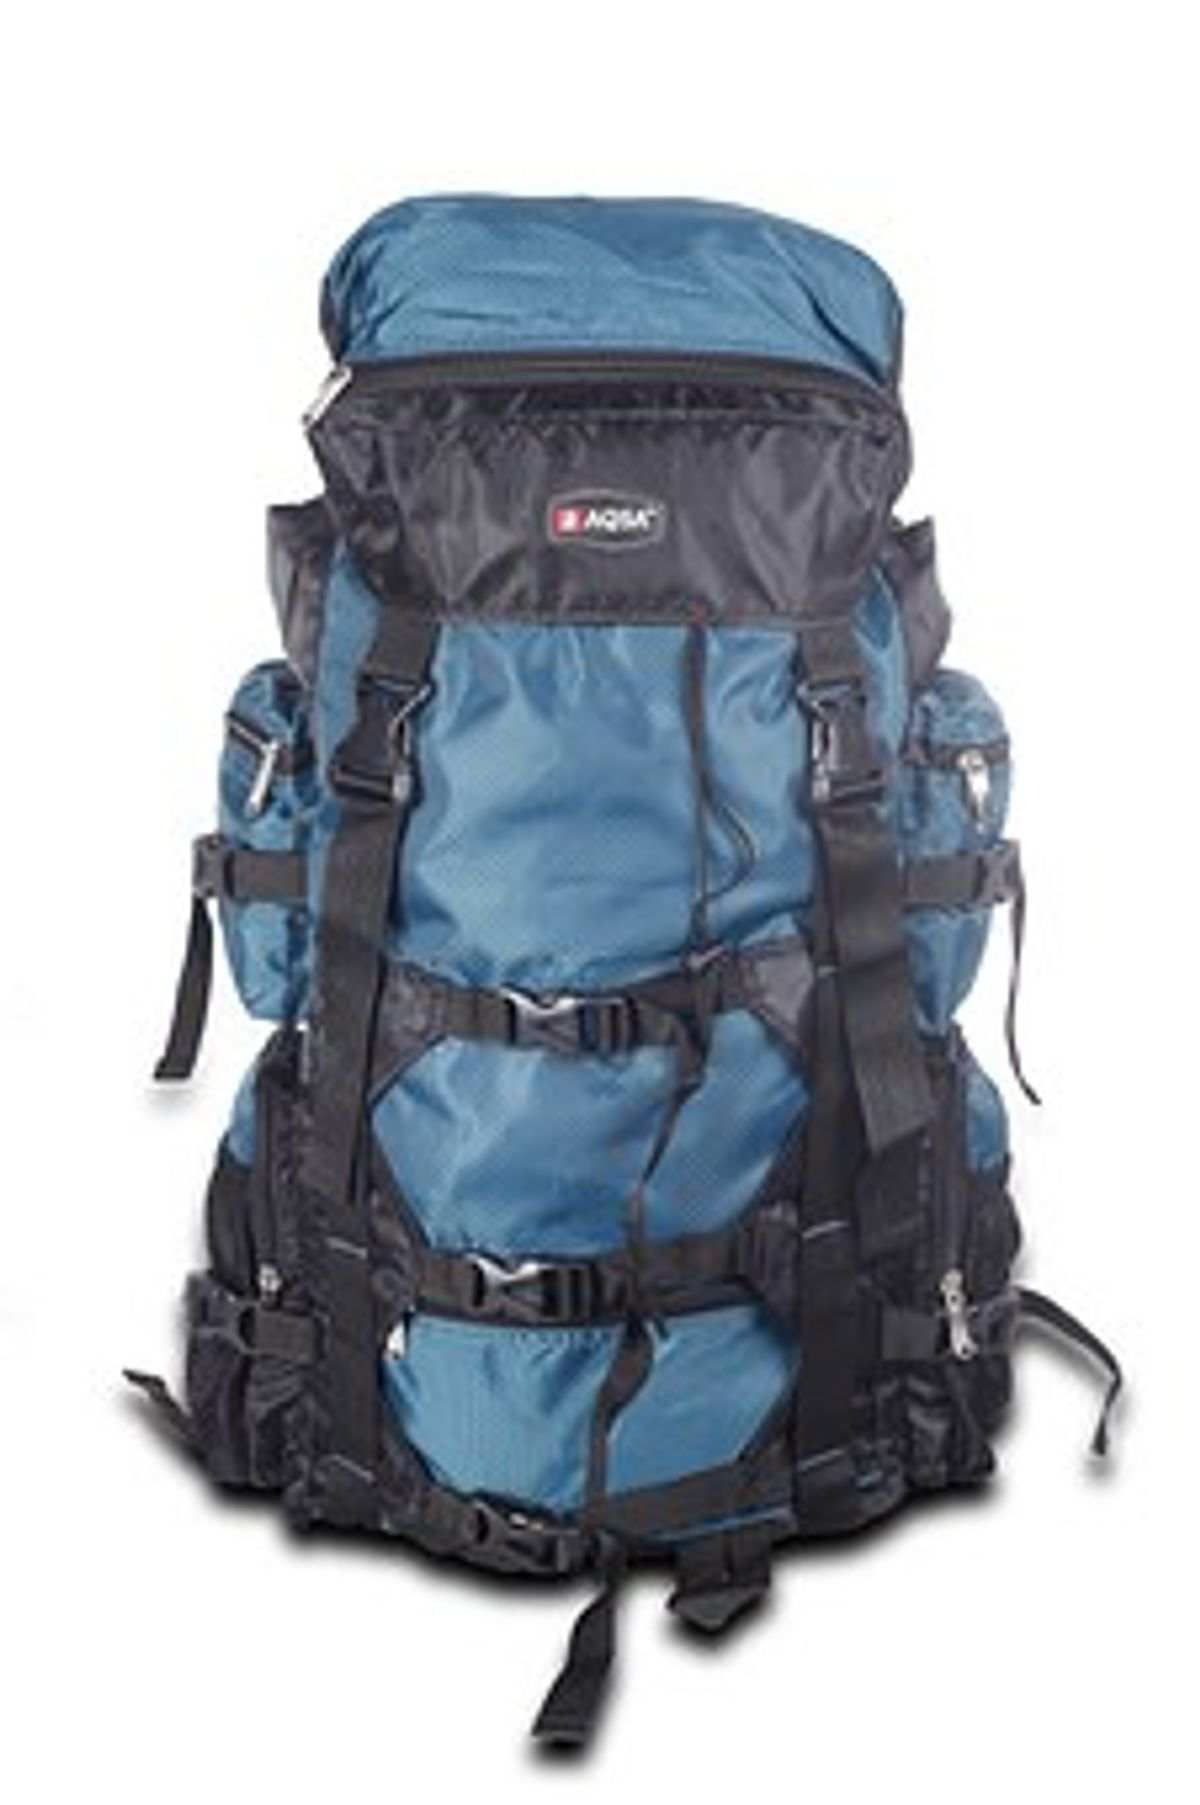 How to Buy a Hiking Backpack